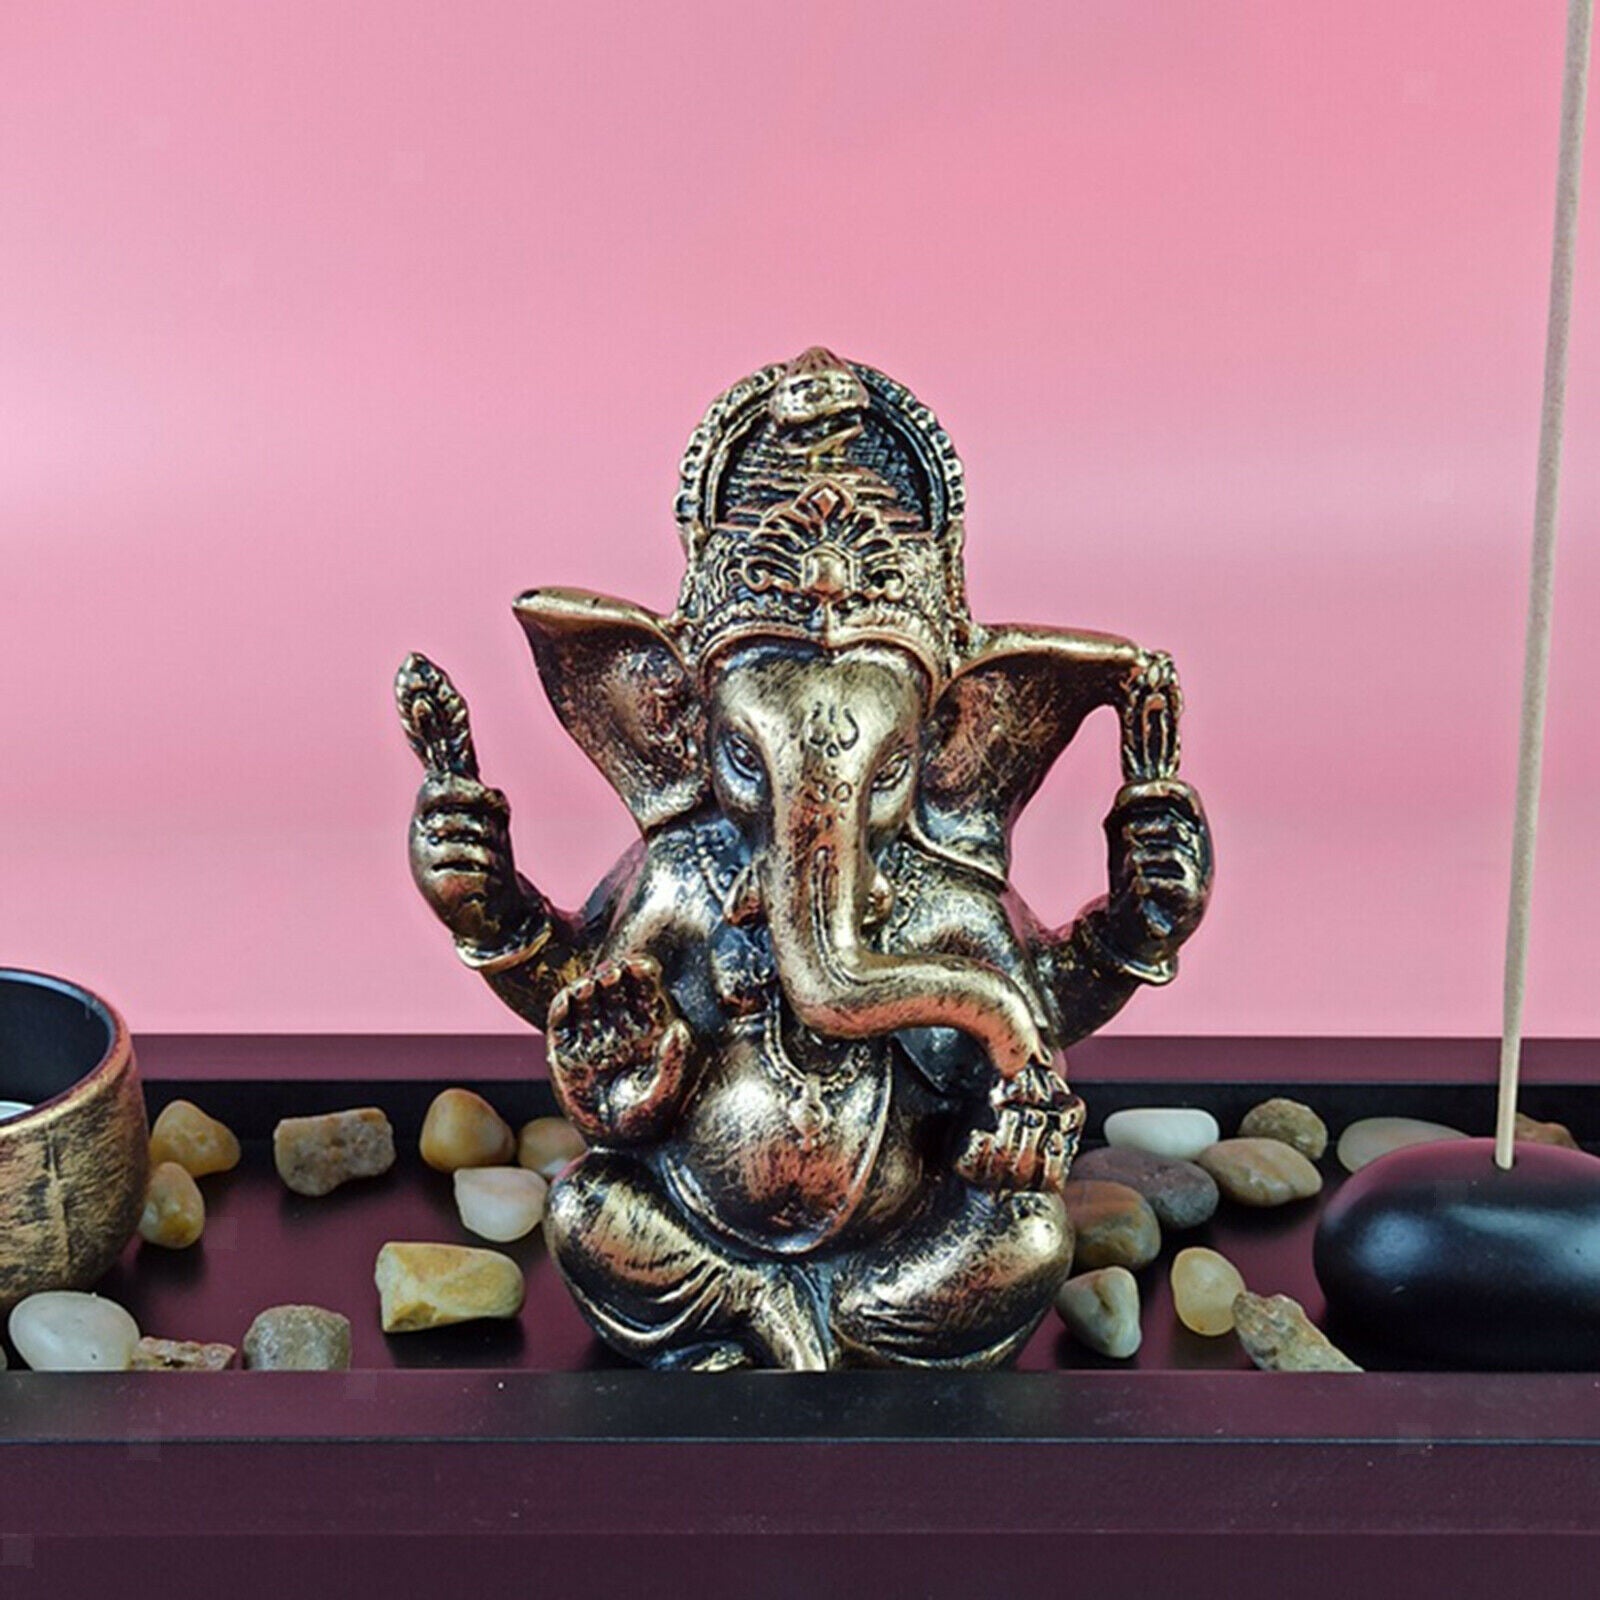 God Lord Ganesha Statue Incense Burner Tray Blessing Home Office Decorations